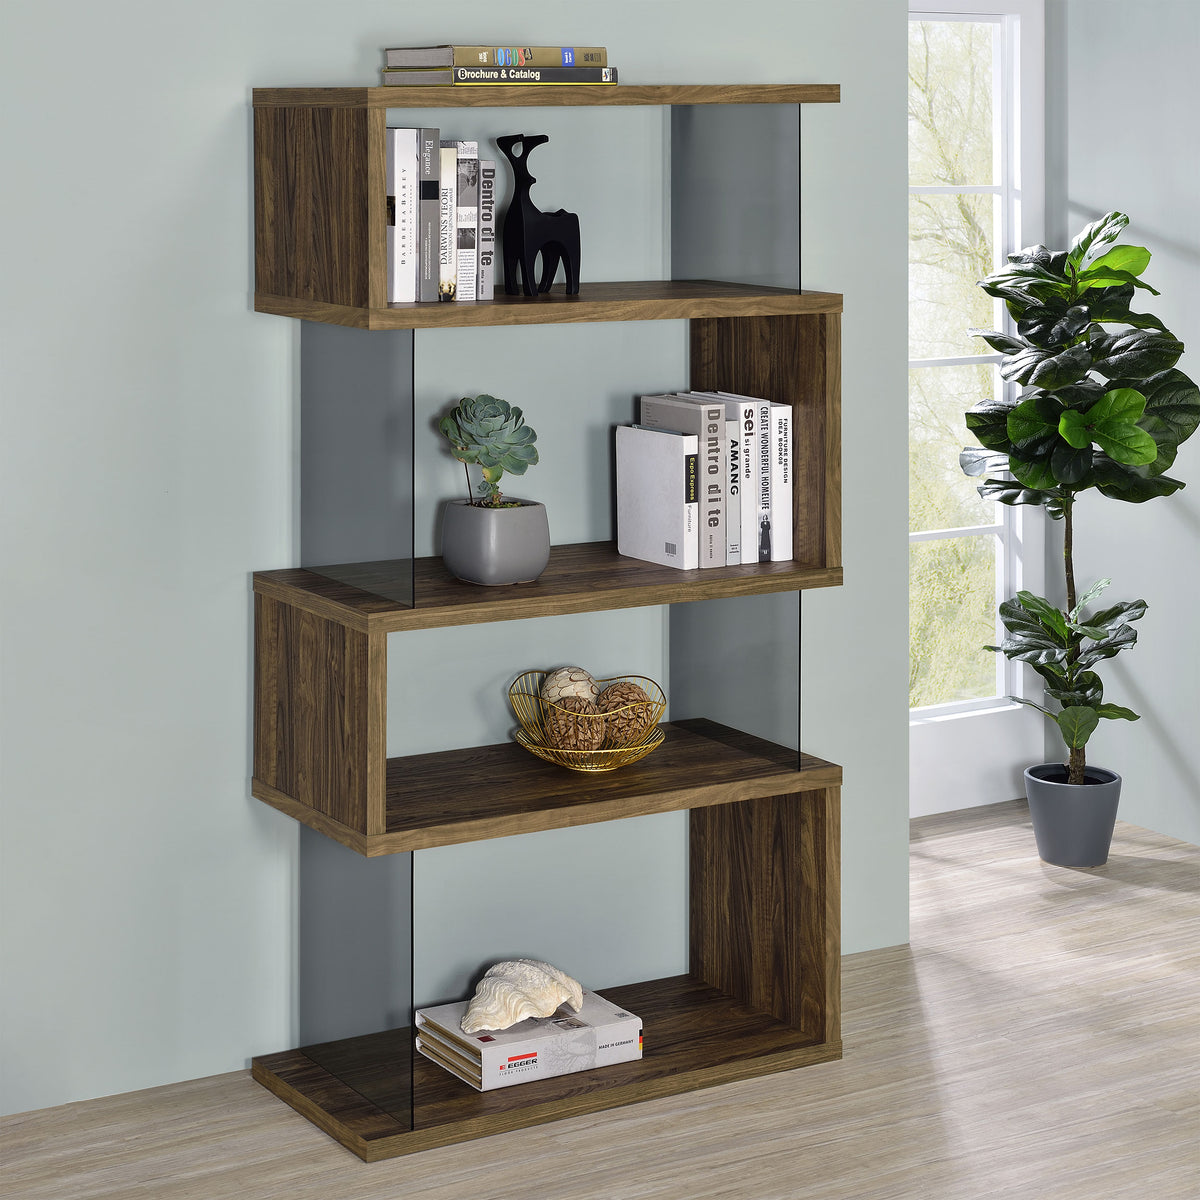 Emelle 4-shelf Bookcase with Glass Panels  Las Vegas Furniture Stores